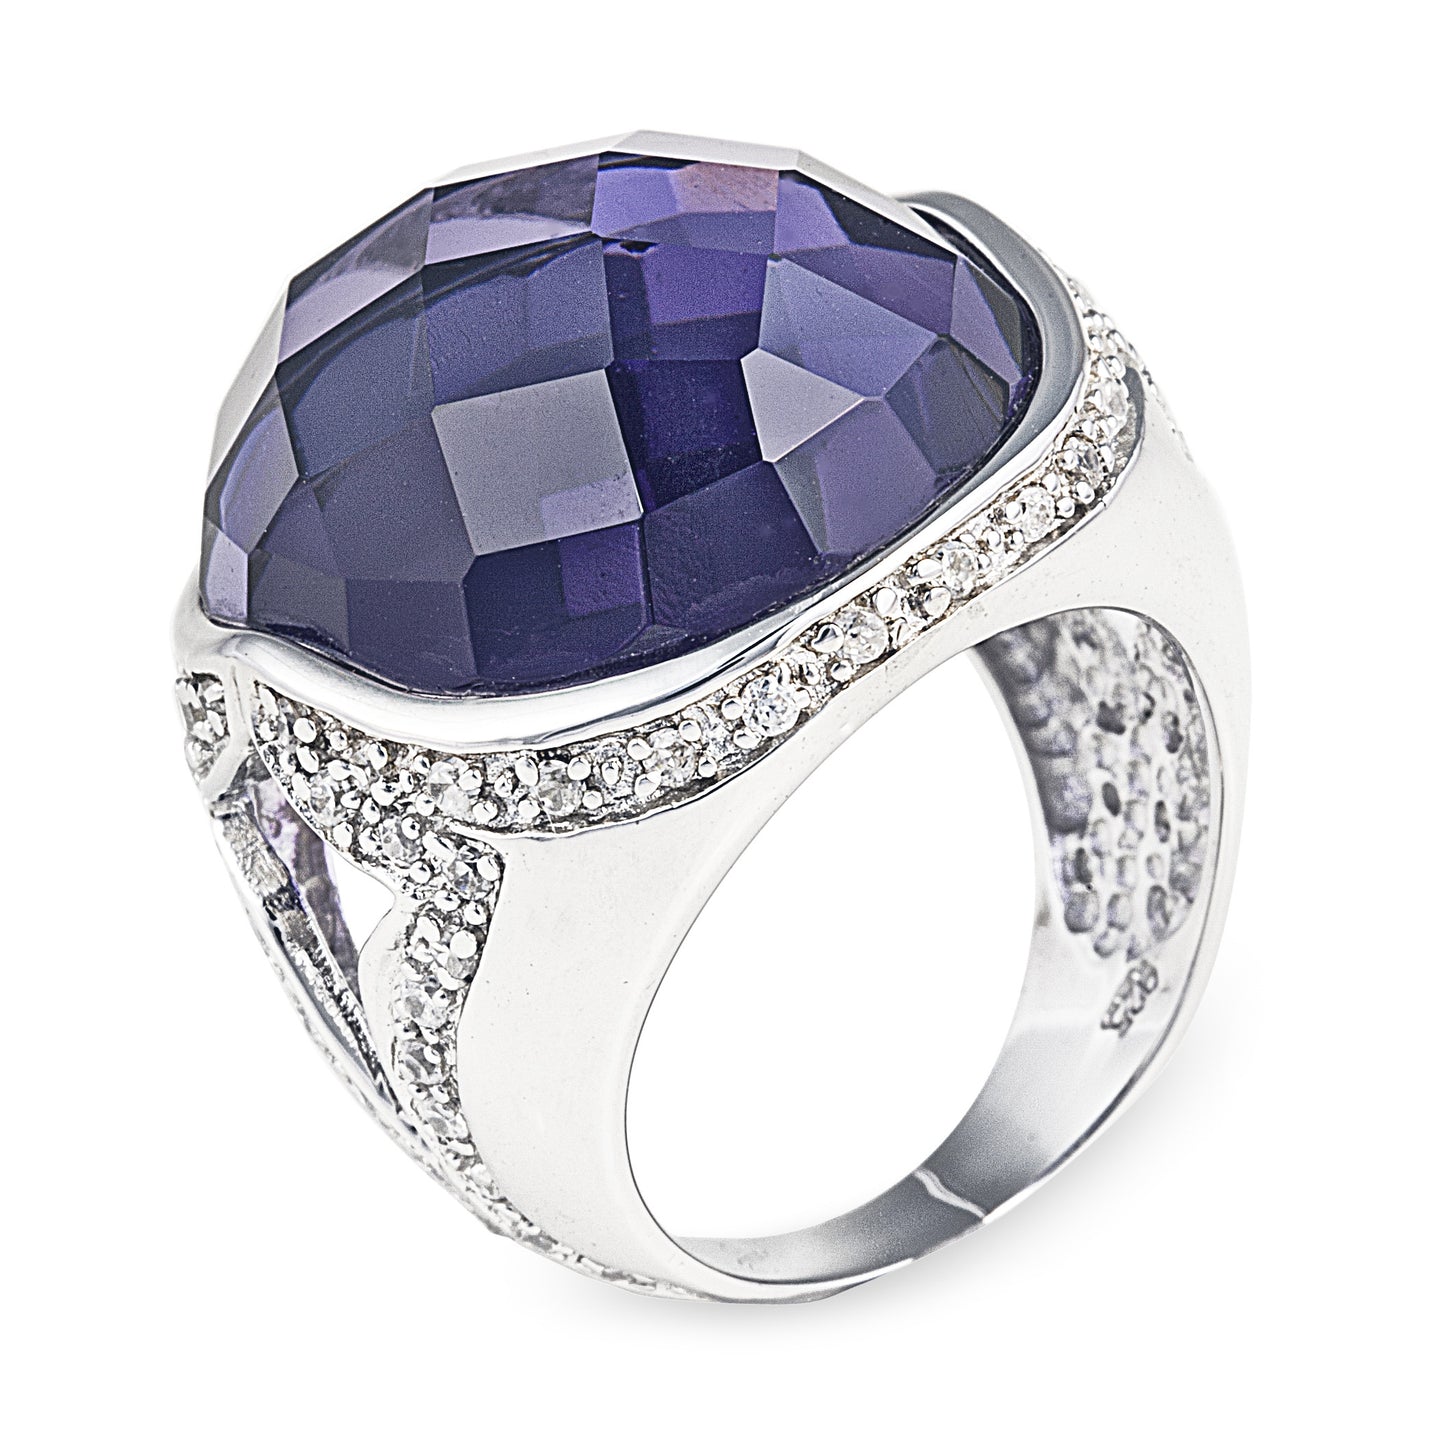 The Lavender Lopez Ring is an elegant 925 sterling silver ring featuring a beautiful side pattern encrusted with cubic zirconia stones that hold in place a stunning facet cut purple obsidian that grabs lots of attention. Matching earrings are available. Worldwide Shipping. Free shipping for orders $150+ in Australia.